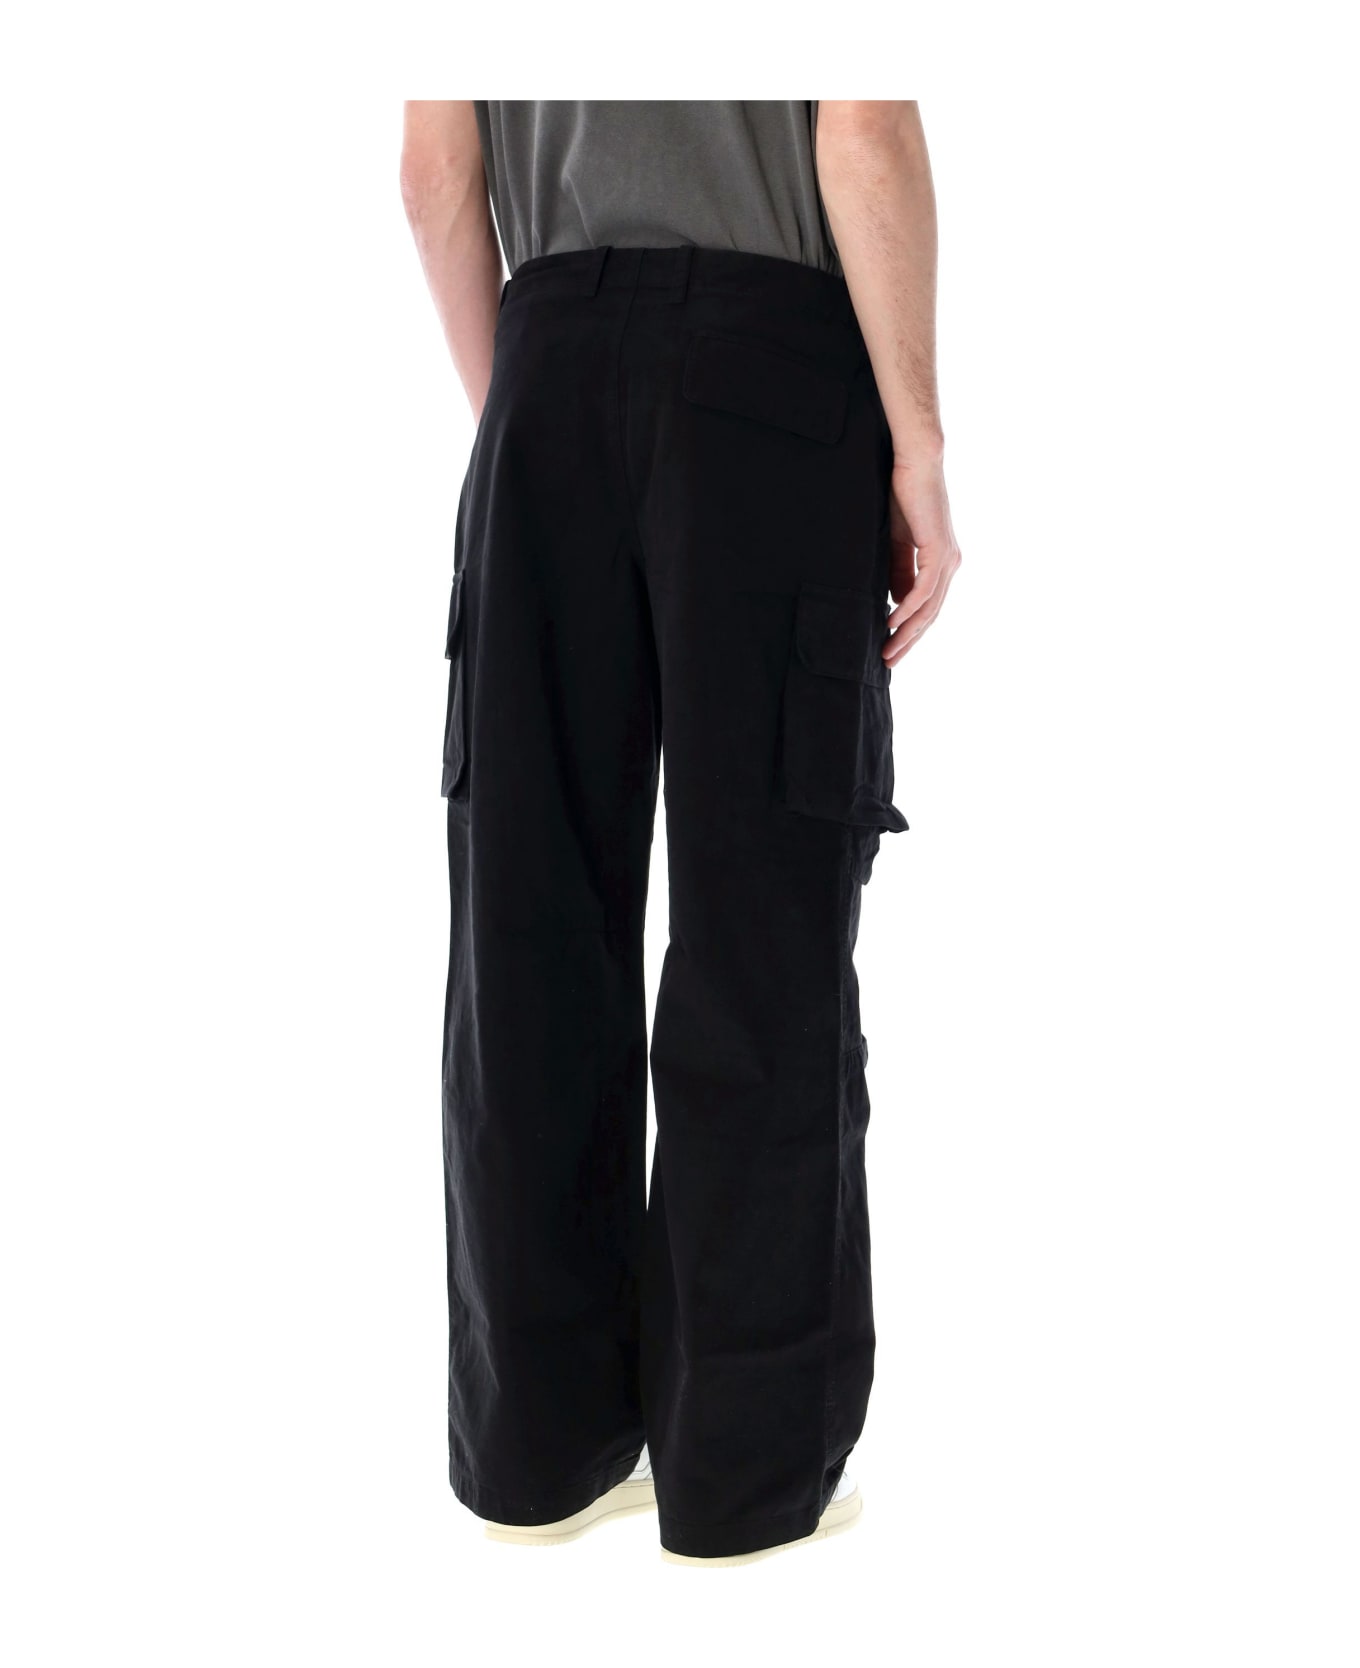 Our Legacy Mount Cargo Pants - BLACK CANVAS ボトムス